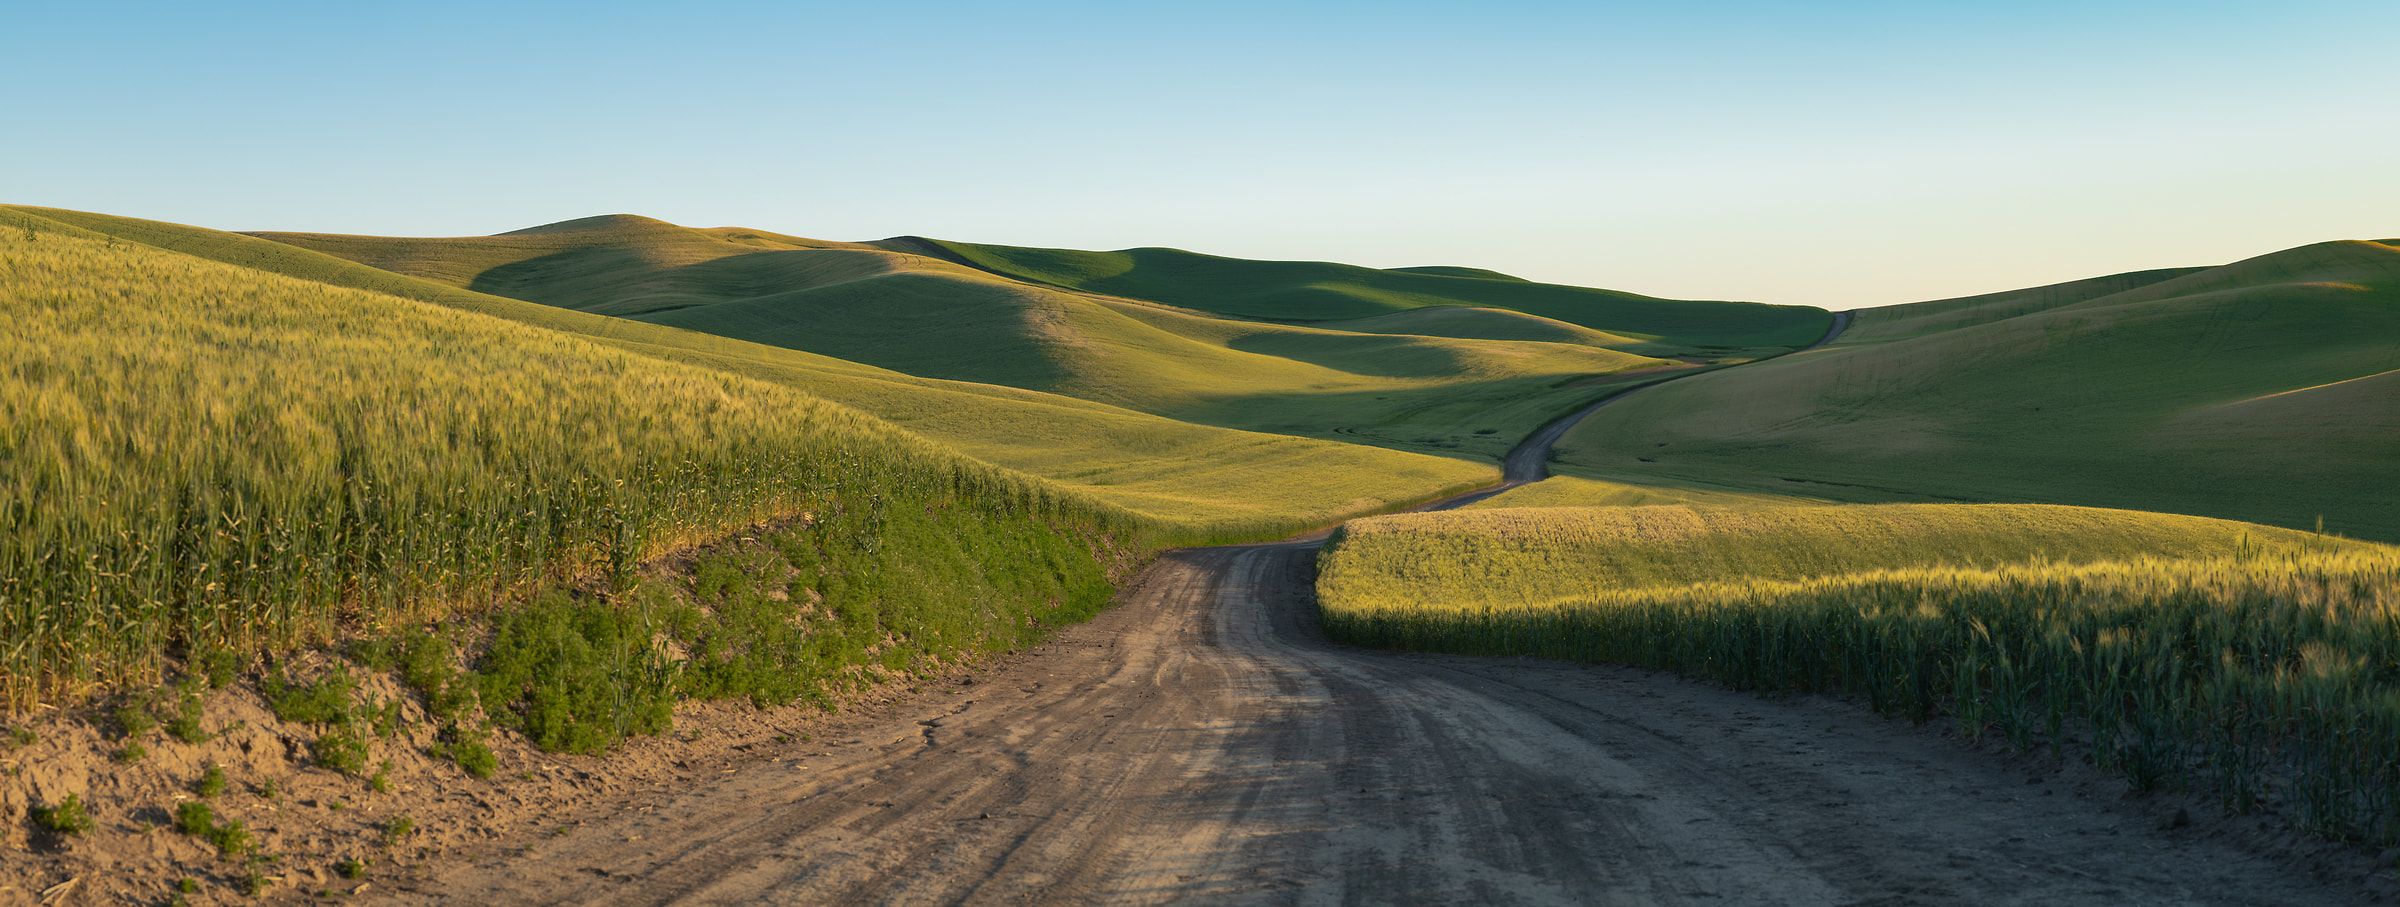 408 megapixels! A very high resolution, large-format VAST photo print of a dirt road going through a wheat field; landscape photograph created by Greg Probst in Palouse, Washington.